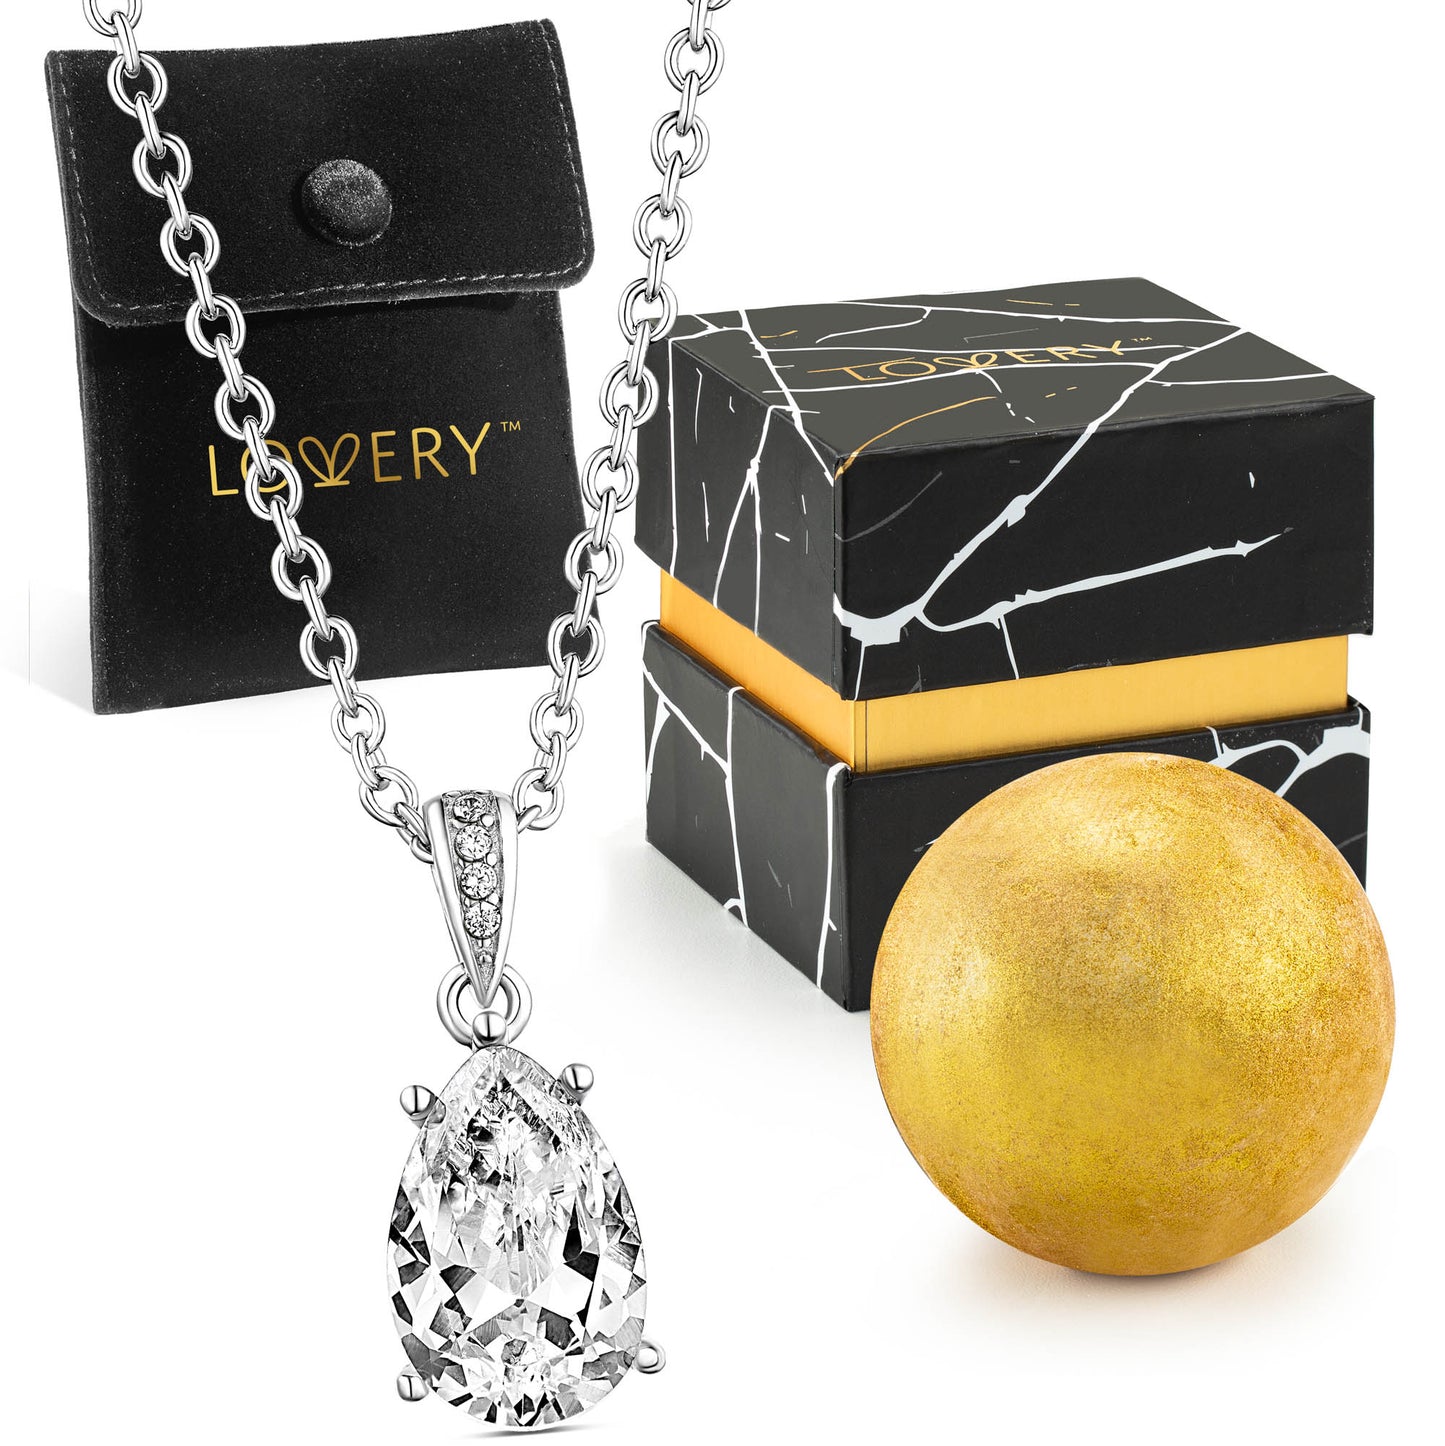 Sterling Silver Tear Drop Shaped CZ Stone Pendant with Chain, Pouch, Bath Bomb & Gift Box